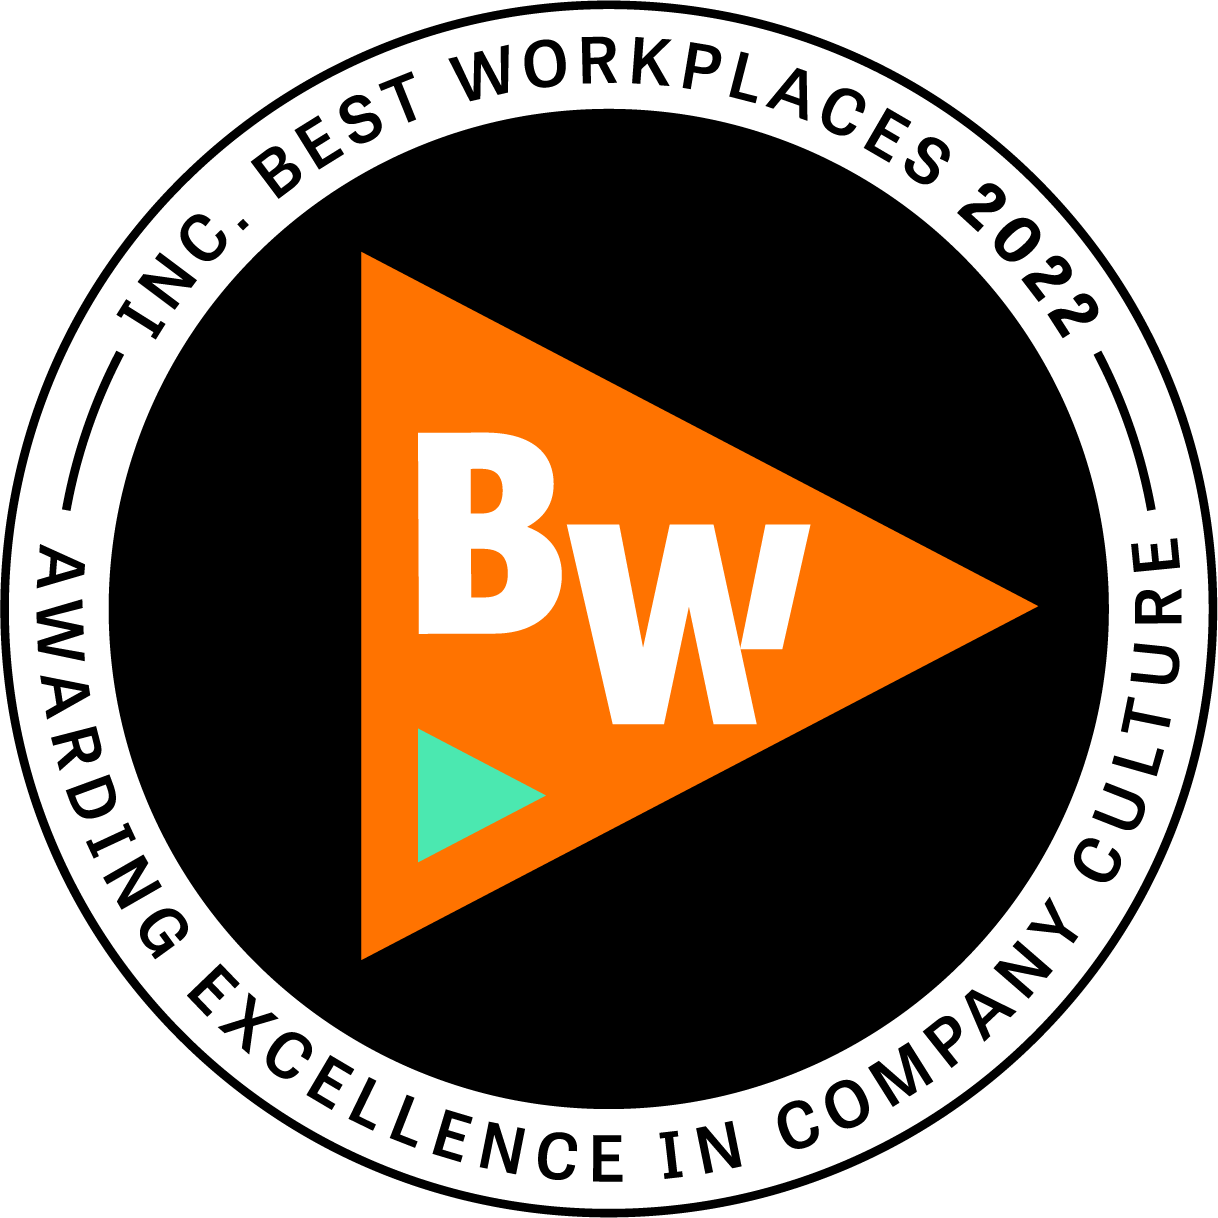 Inc. Magazine Names Cornerstone Research to Best Workplaces List 2022